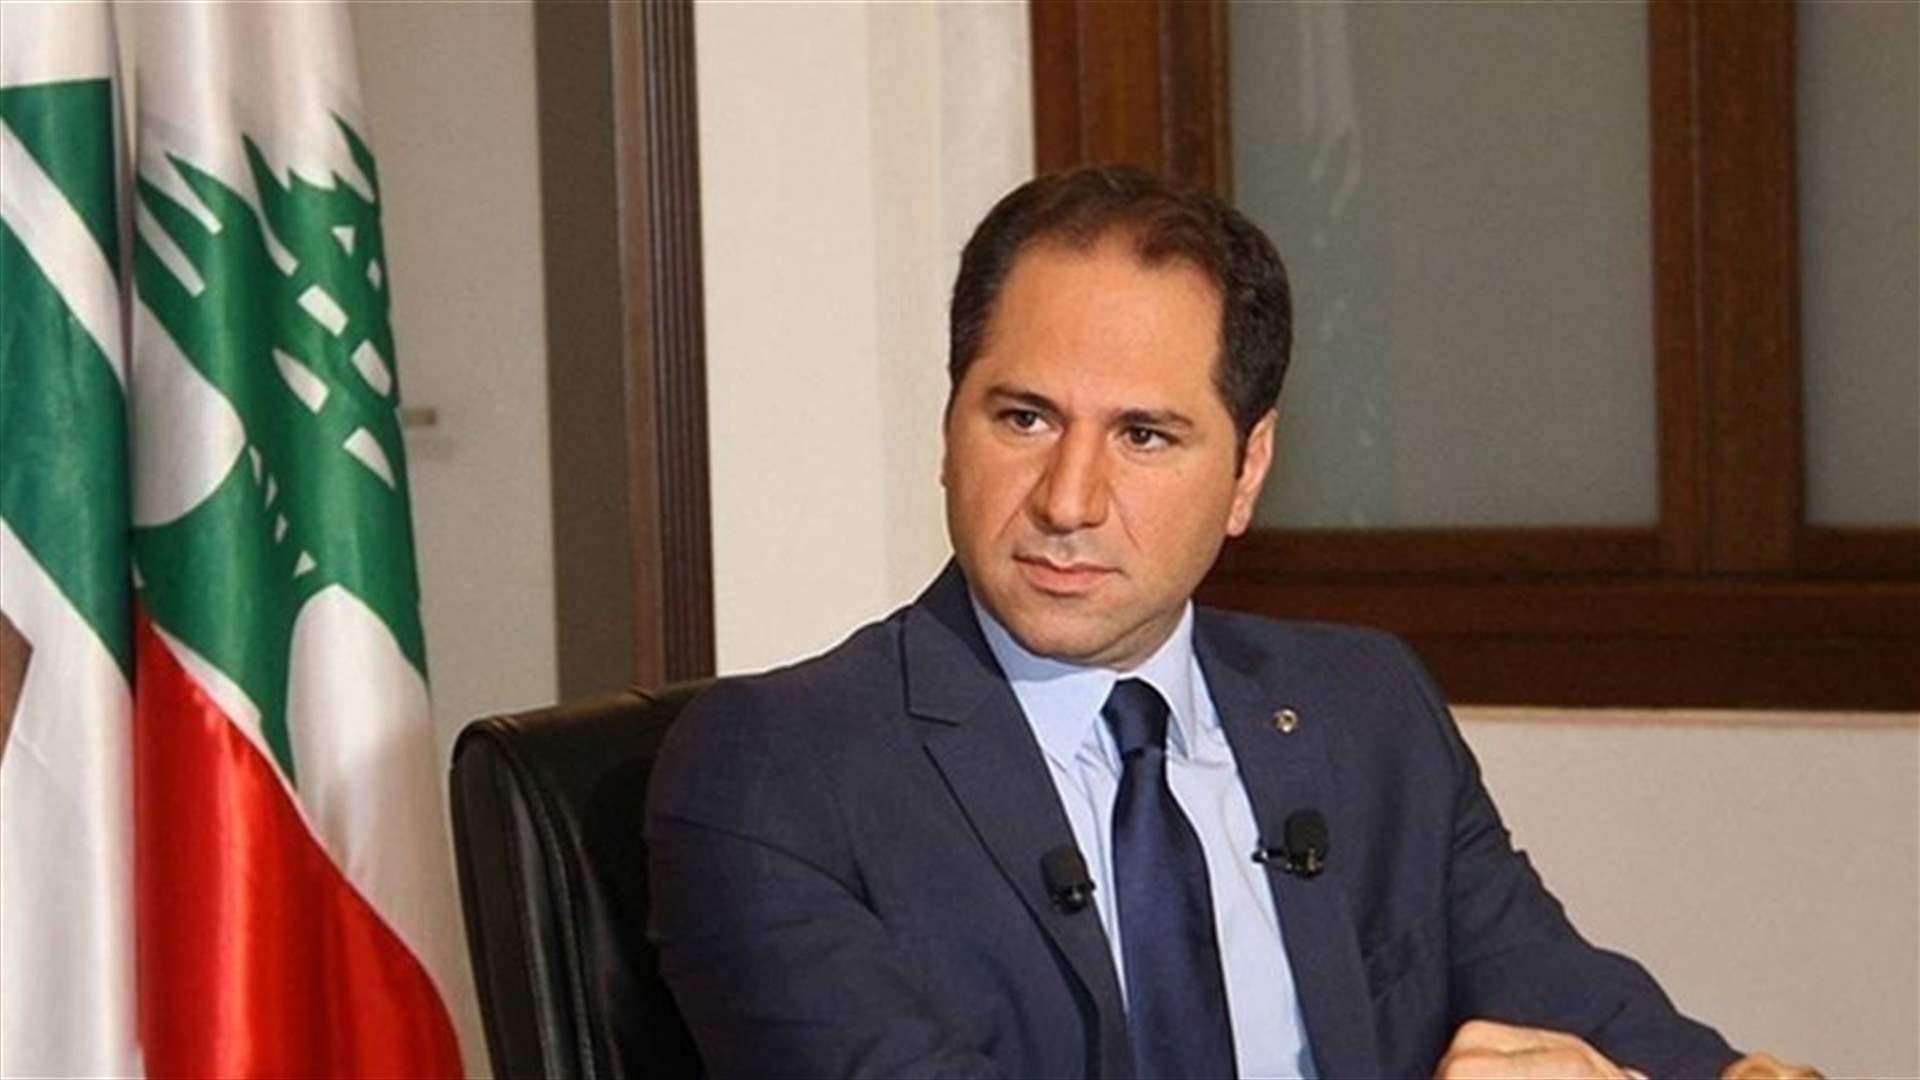 MP Gemayel poses a written question to gov over Sidon beach incident